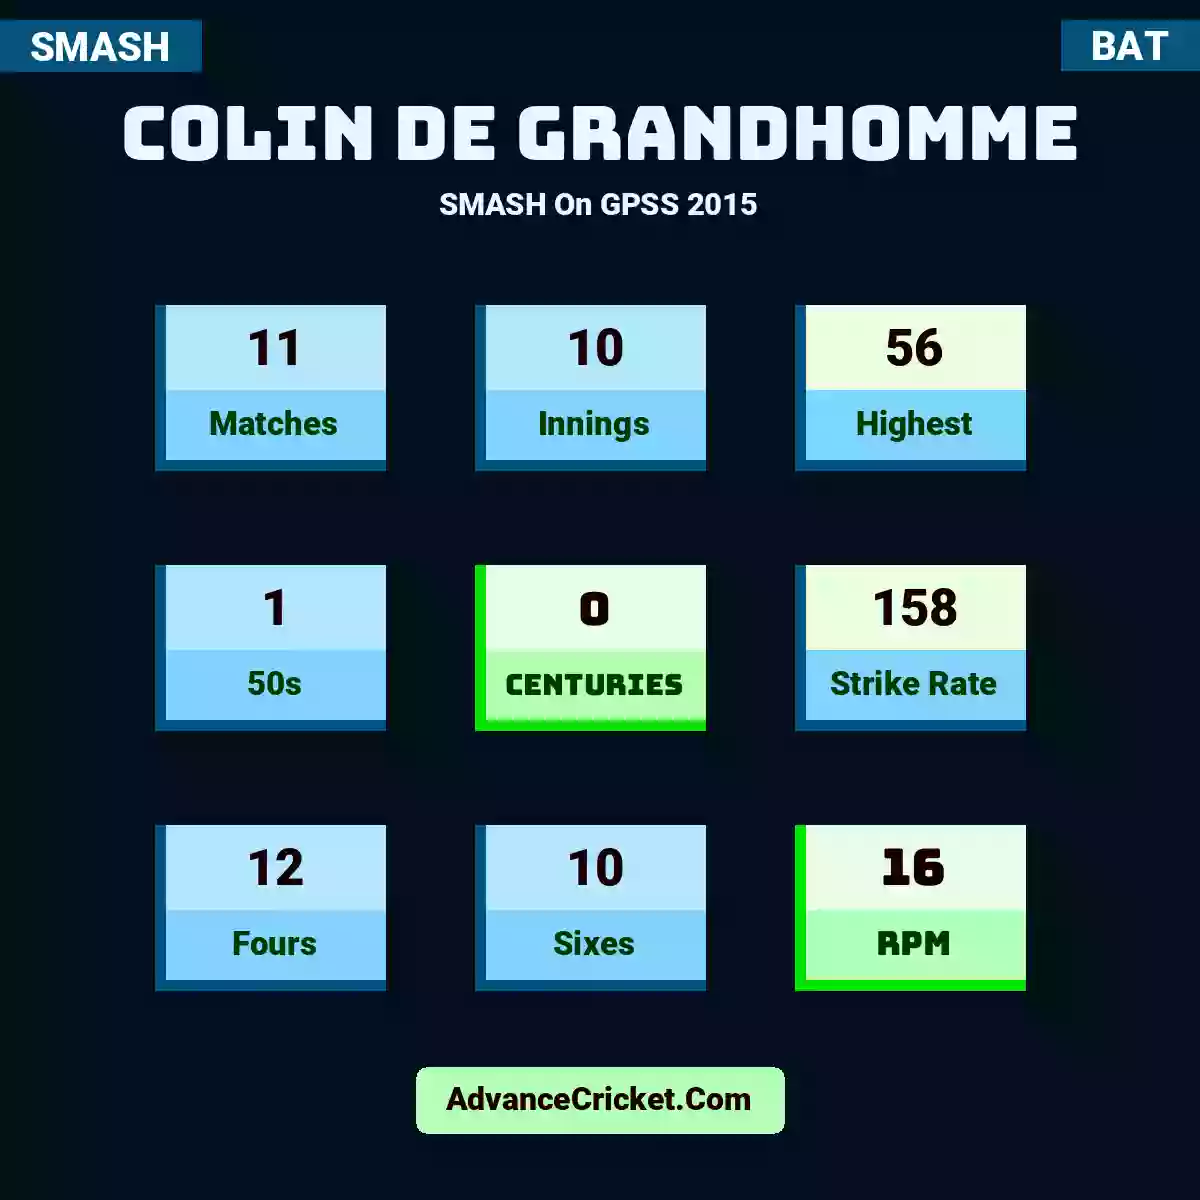 Colin de Grandhomme SMASH  On GPSS 2015, Colin de Grandhomme played 11 matches, scored 56 runs as highest, 1 half-centuries, and 0 centuries, with a strike rate of 158. C.Grandhomme hit 12 fours and 10 sixes, with an RPM of 16.